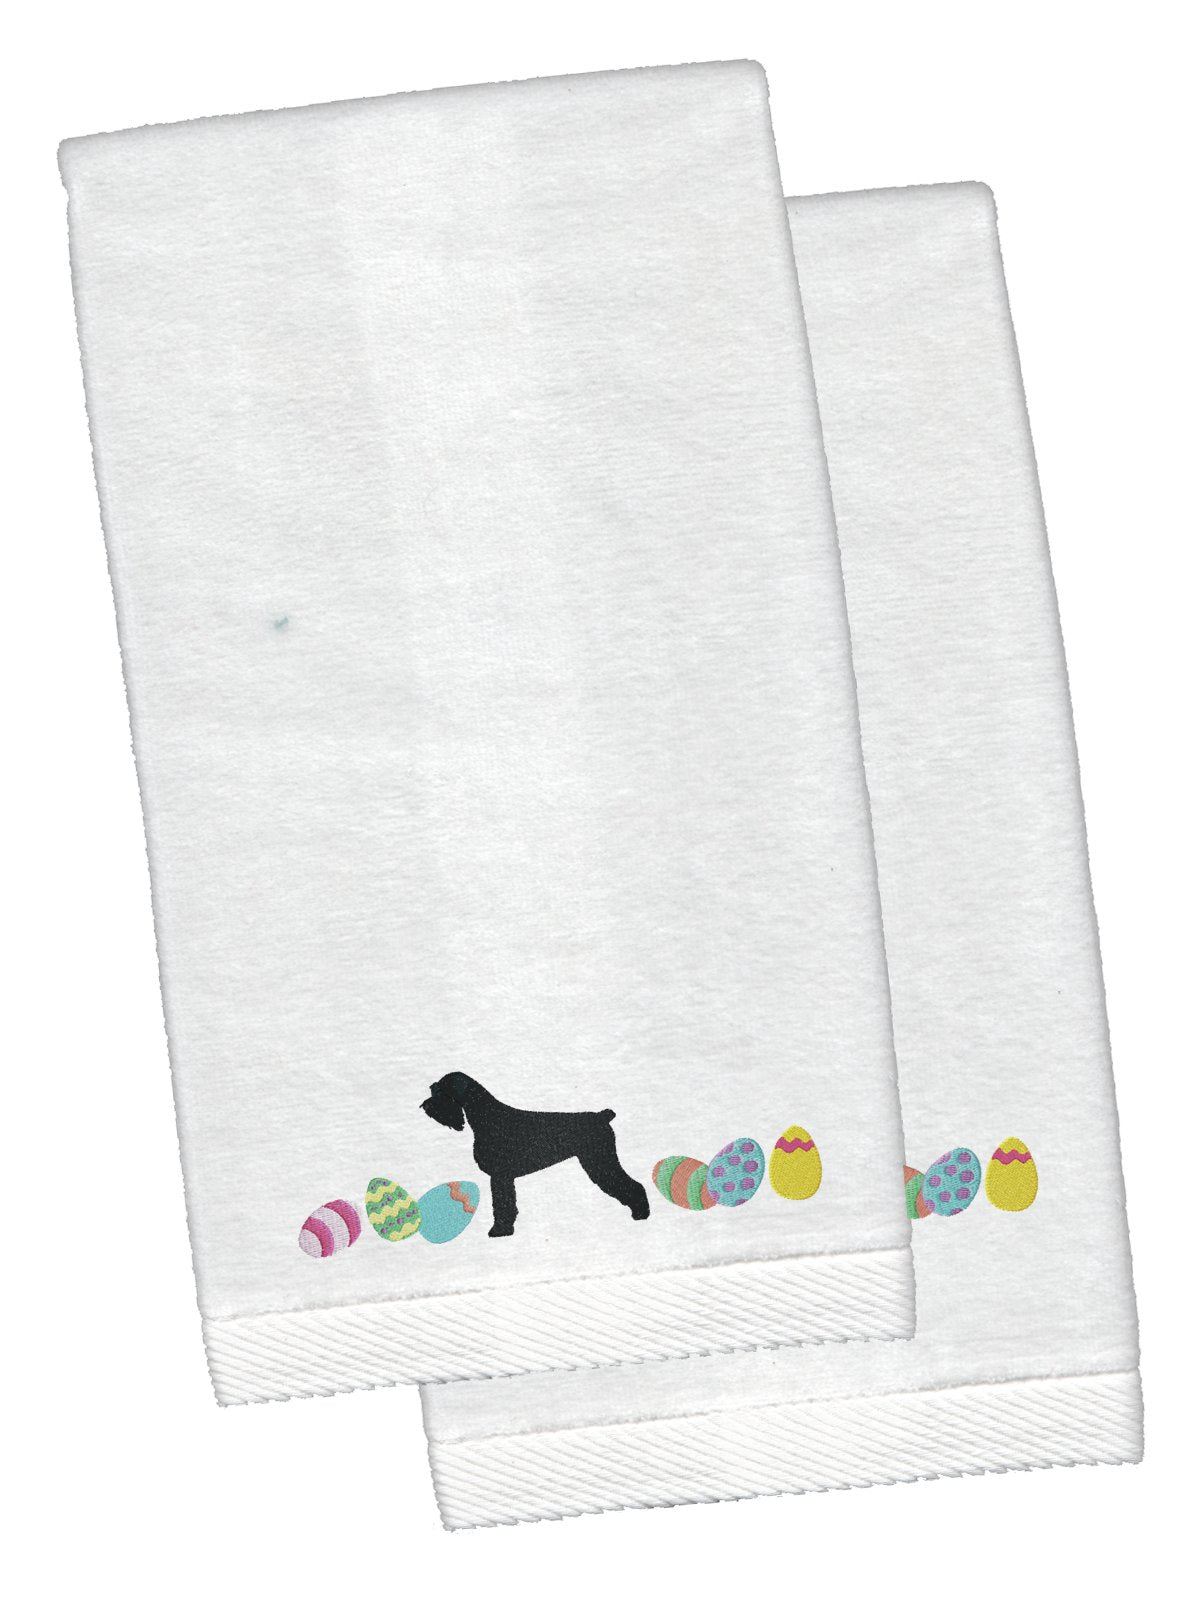 Giant Schnauzer Easter White Embroidered Plush Hand Towel Set of 2 CK1646KTEMB by Caroline's Treasures